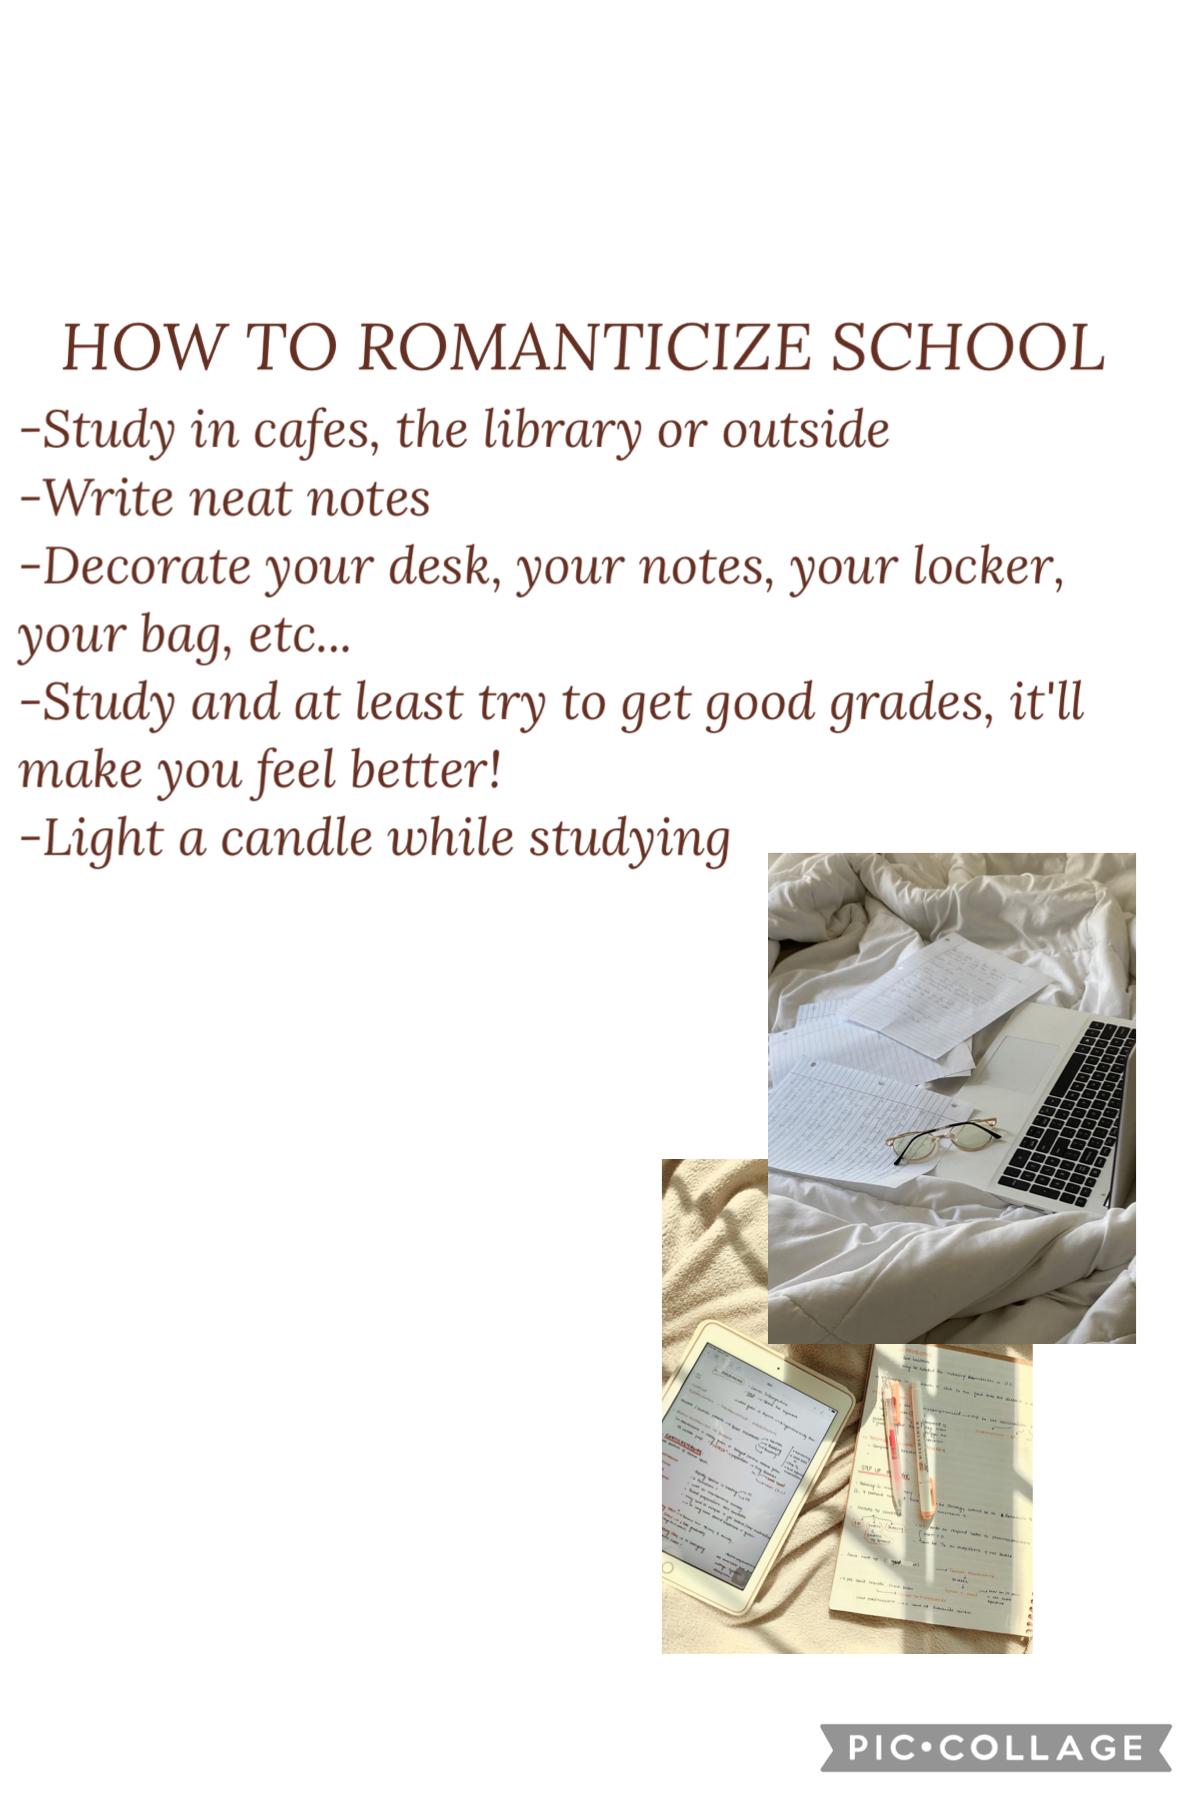 How to romanticize school •2/♾️• clean girl 🎧🪞🫧🧸🤍